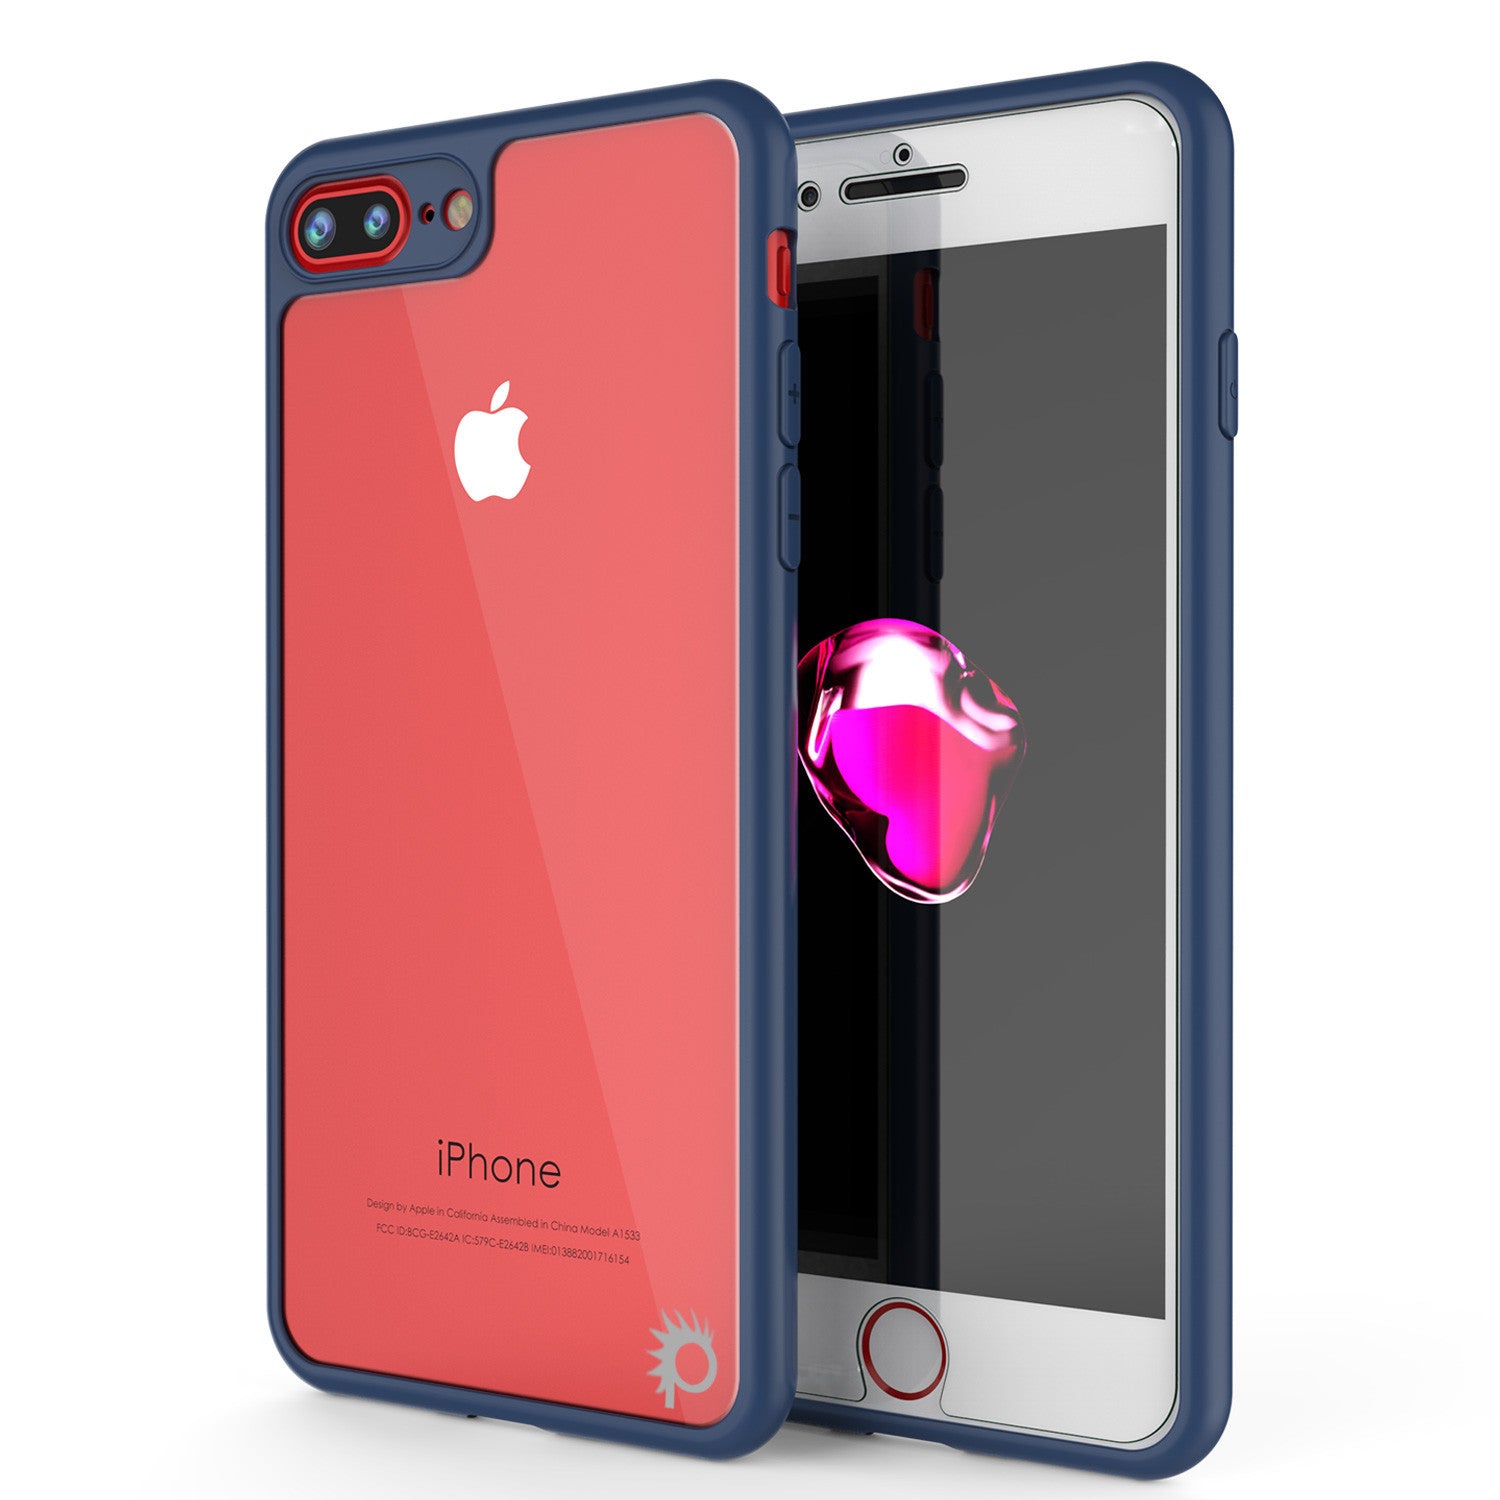 Iphone 7 Plus Case, Punkcase [Mask Series] [Navy] Full Body Hybrid Dual Layer Tpu Cover W/ Protective Tempered Glass Screen Protector